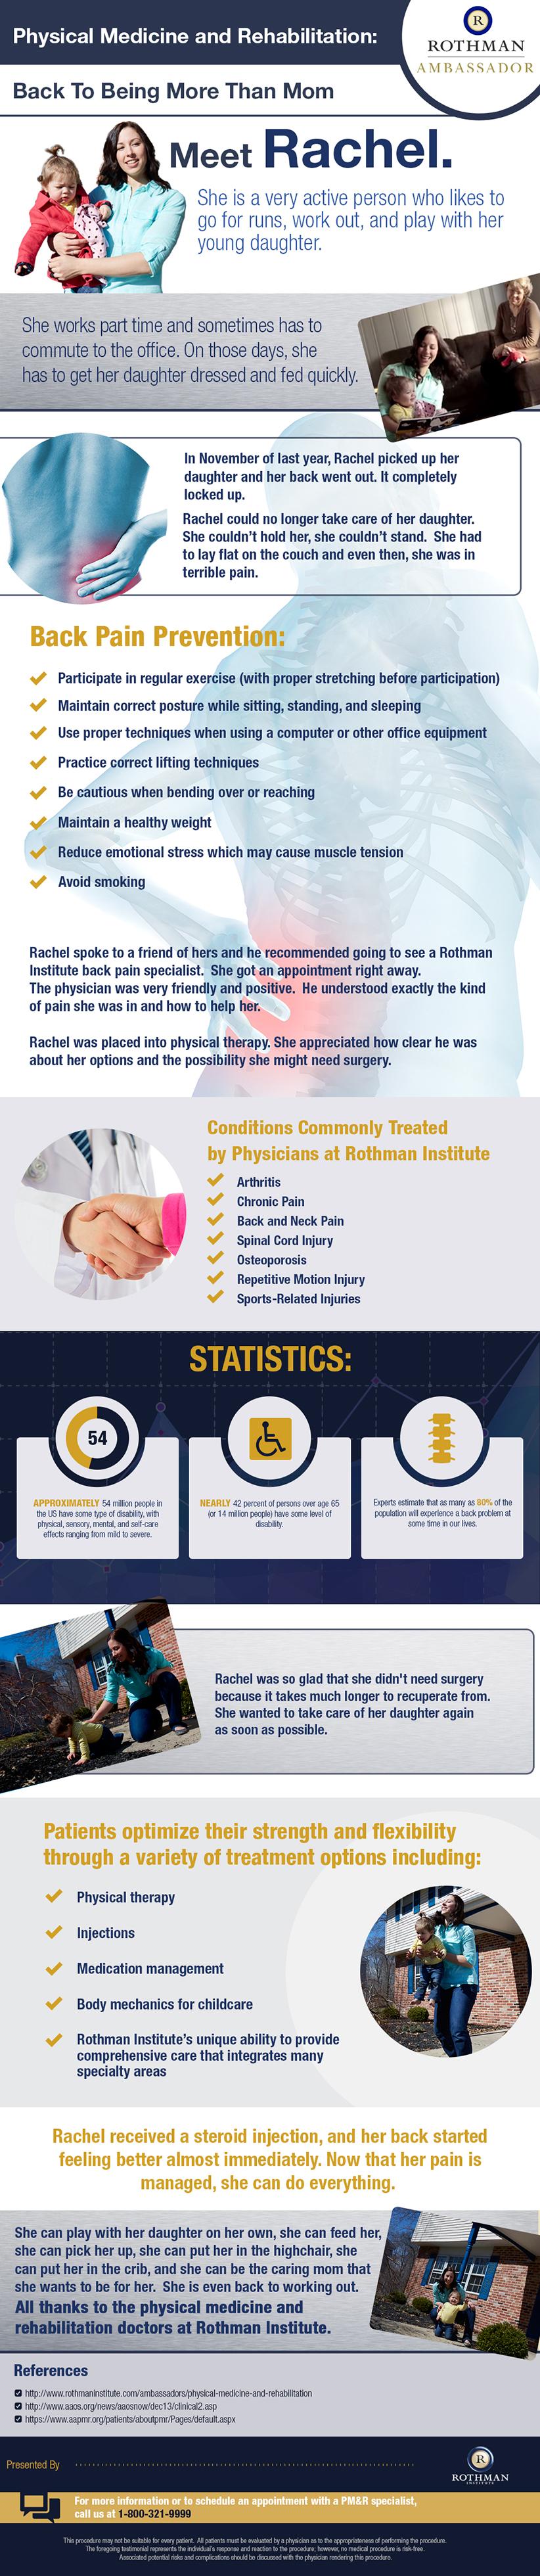 Physical Medicine And Rehabilitation Infographic